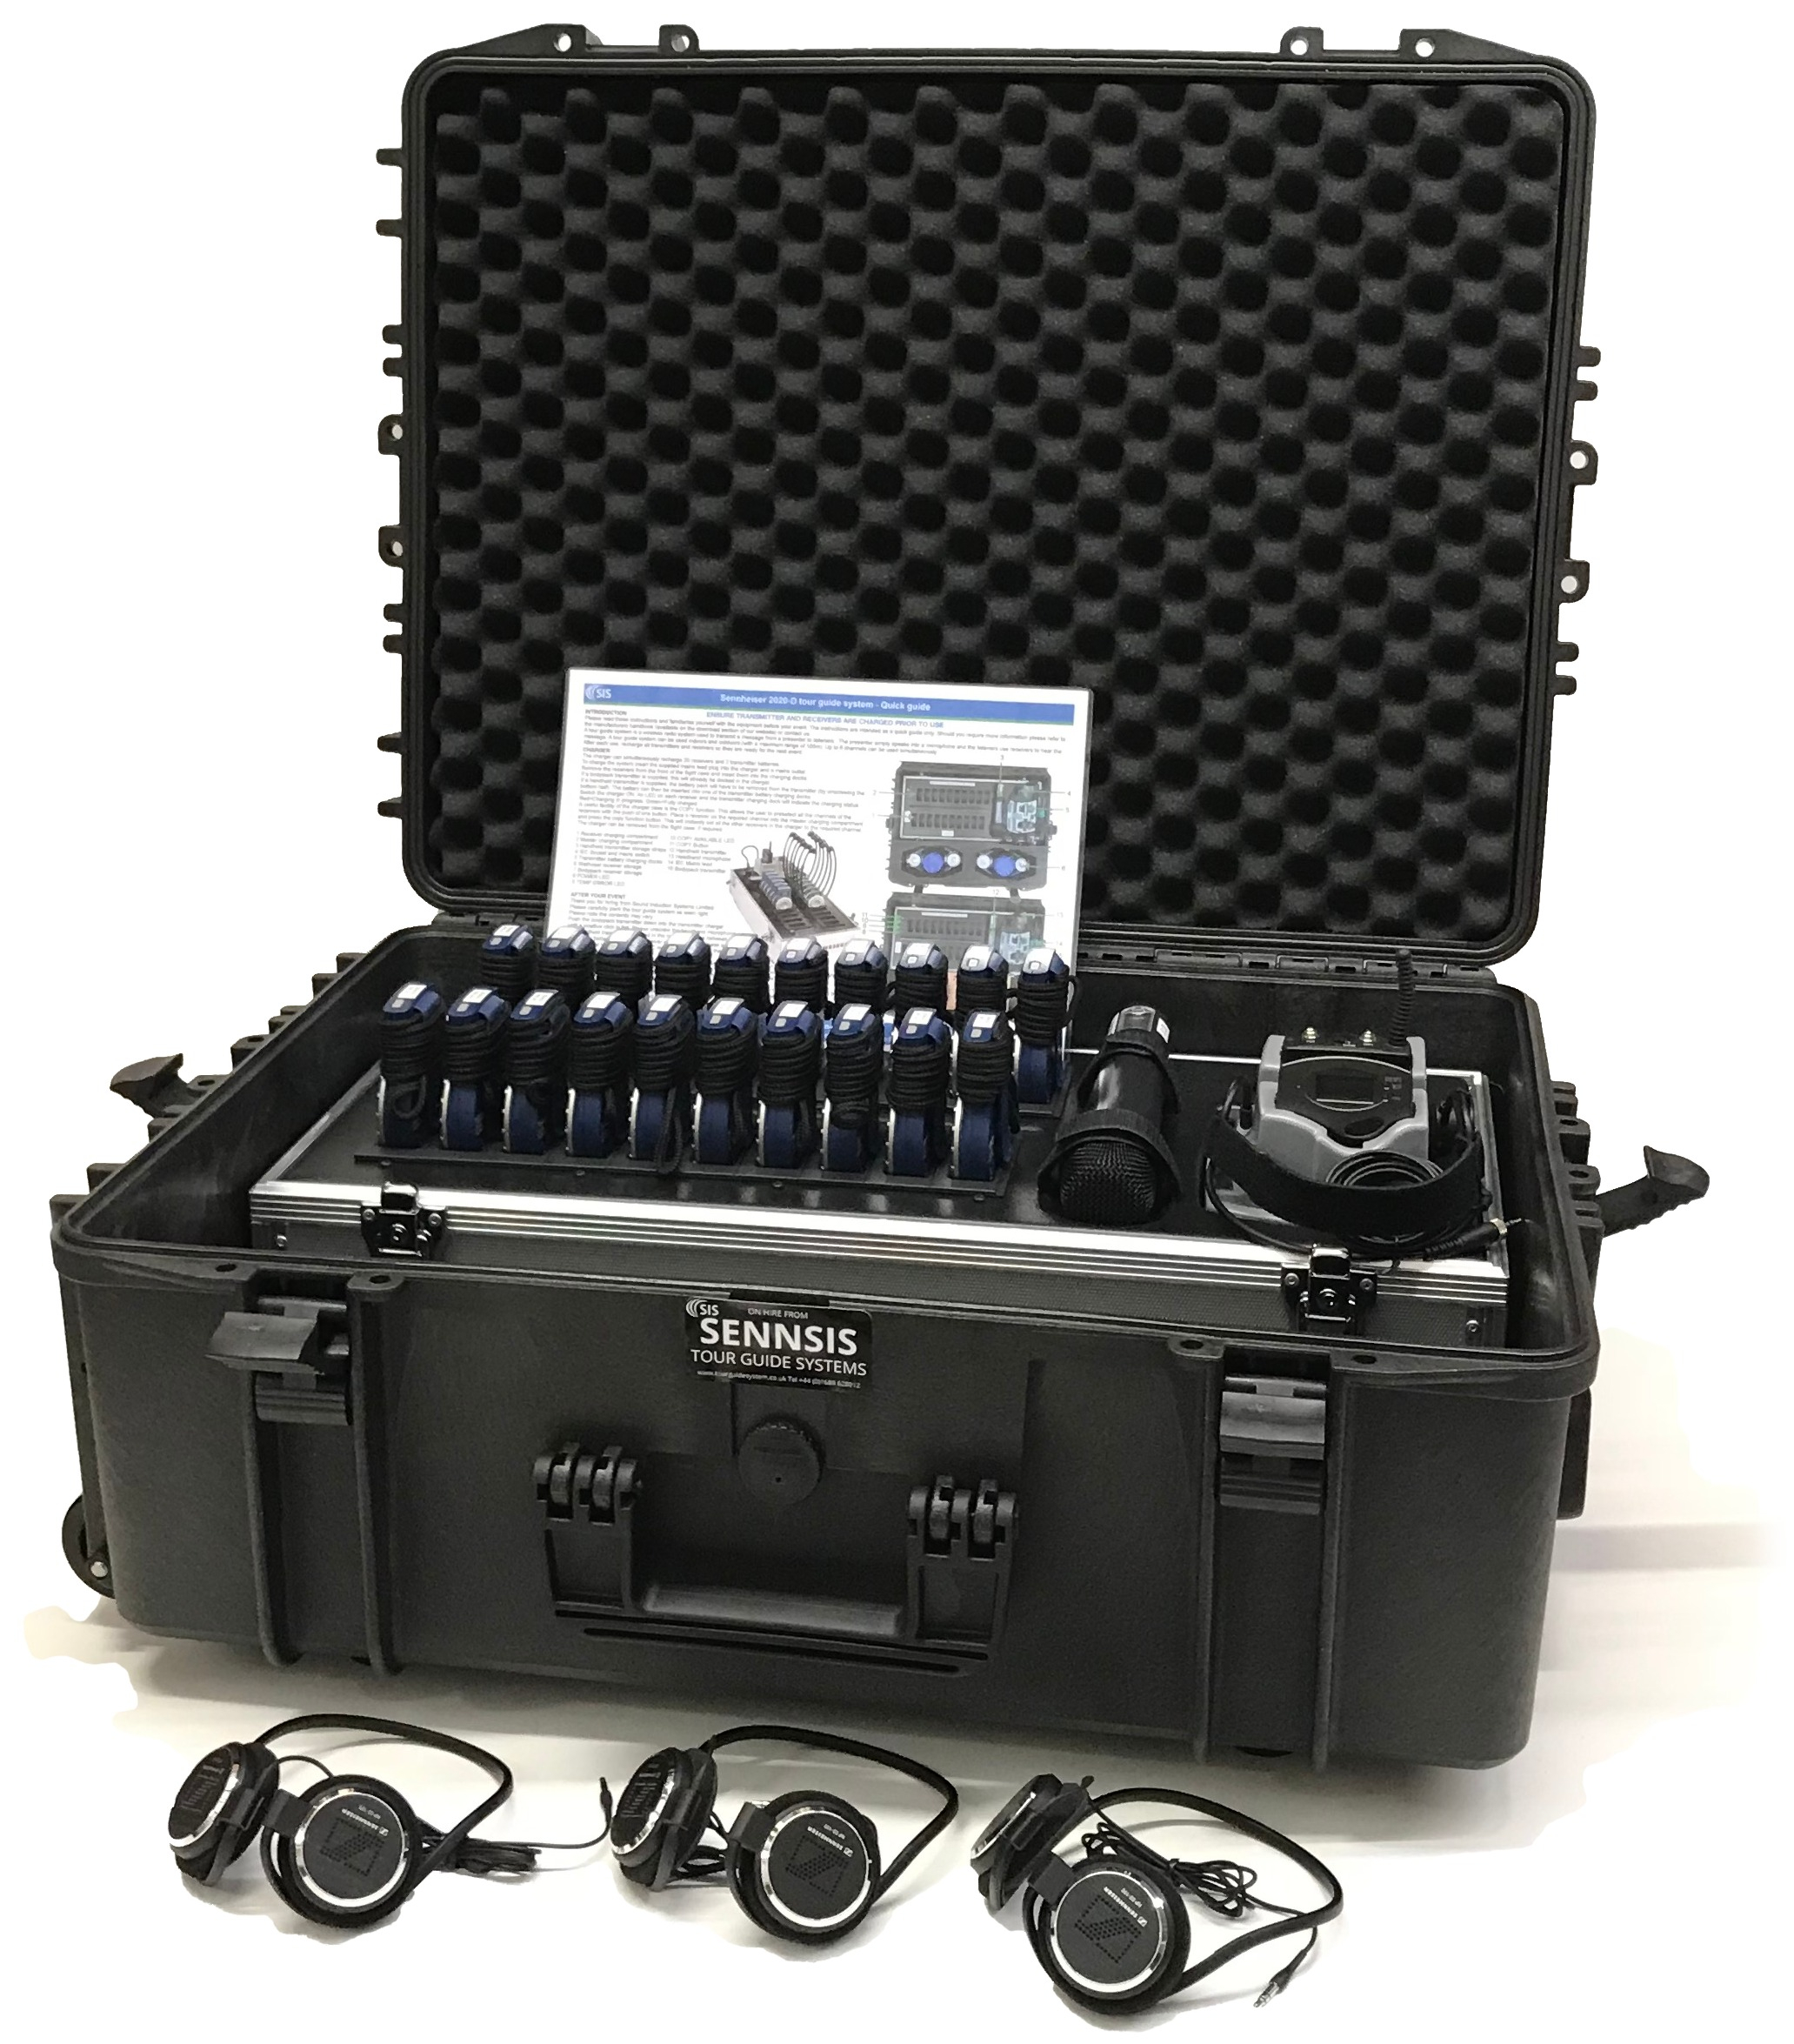 Sennheiser EK 2020-D II tour guide receivers in a charger for rent